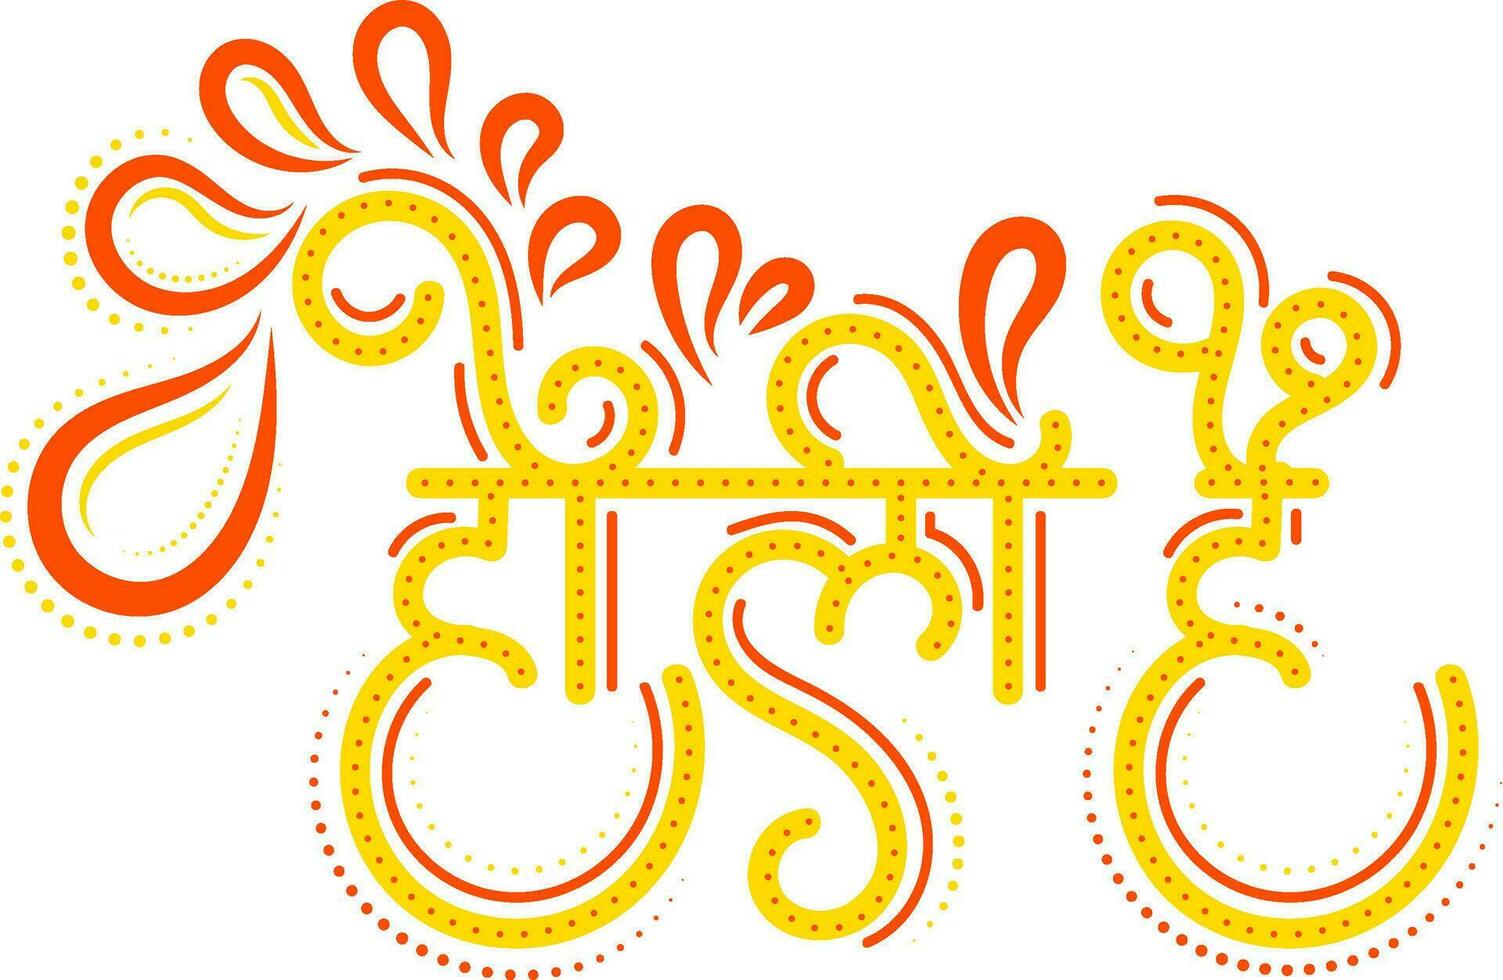 Hindi Language Text It's Holi With Creative Arc Drops In Yellow And Orange Color. vector